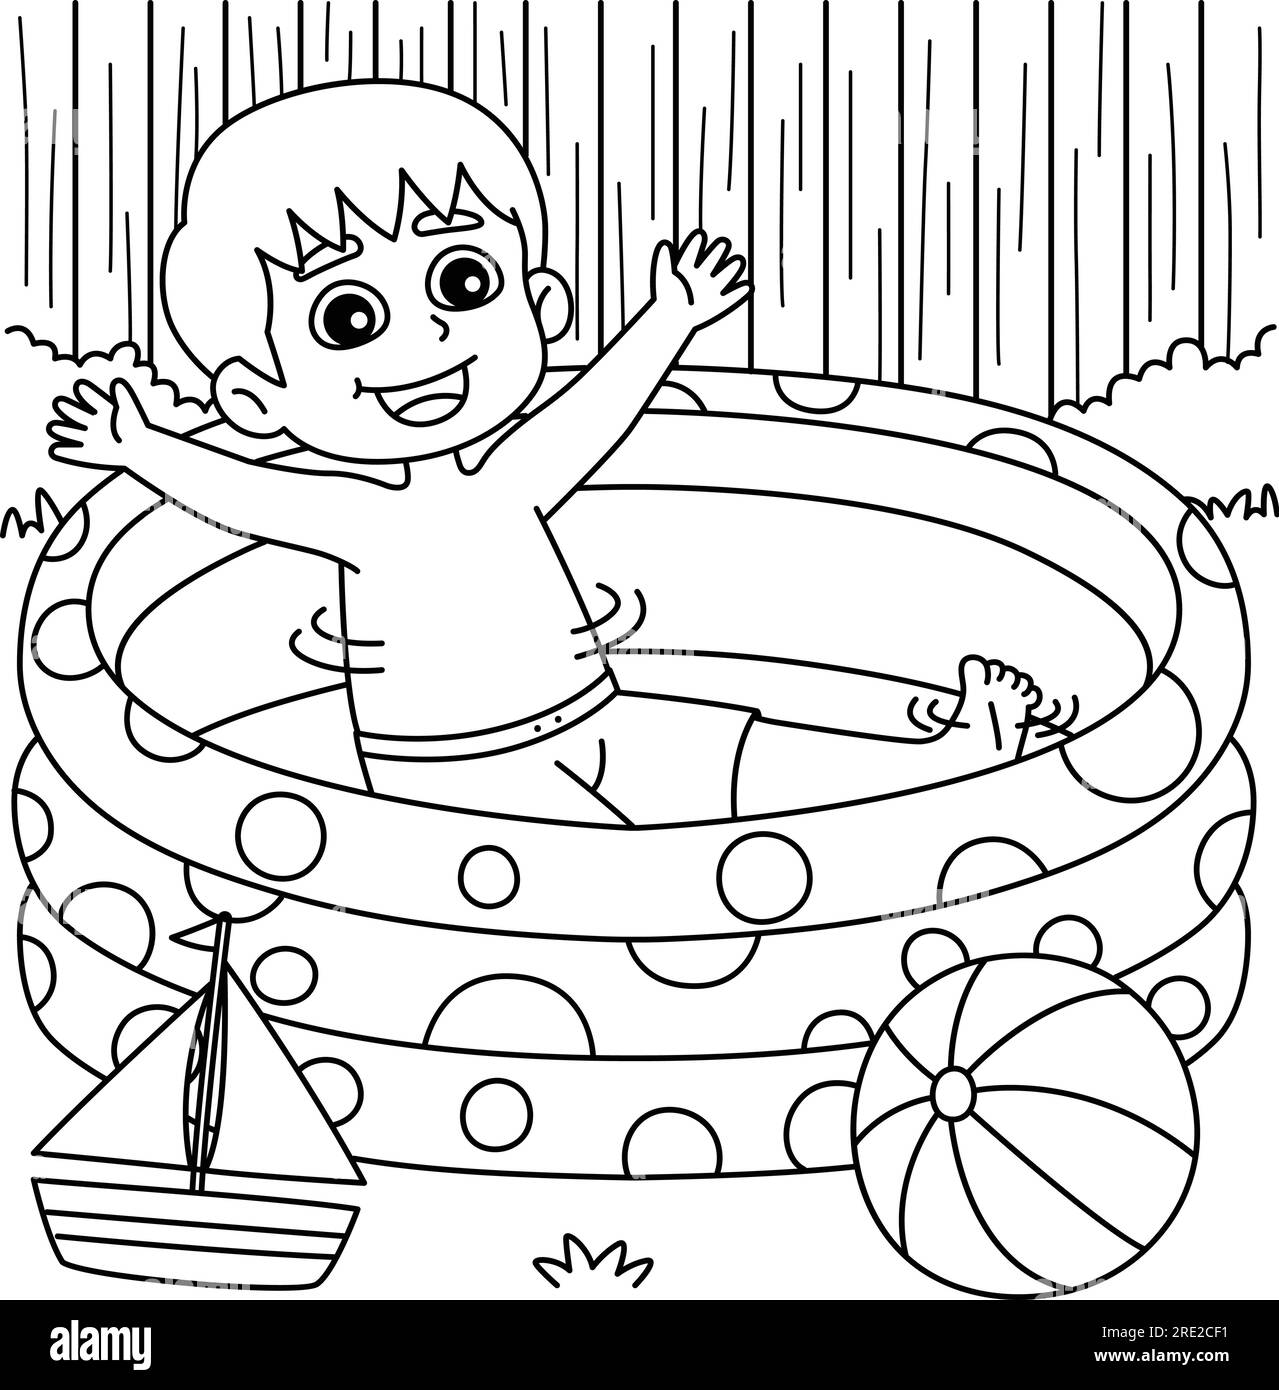 Boy in swimming pool summer coloring page stock vector image art